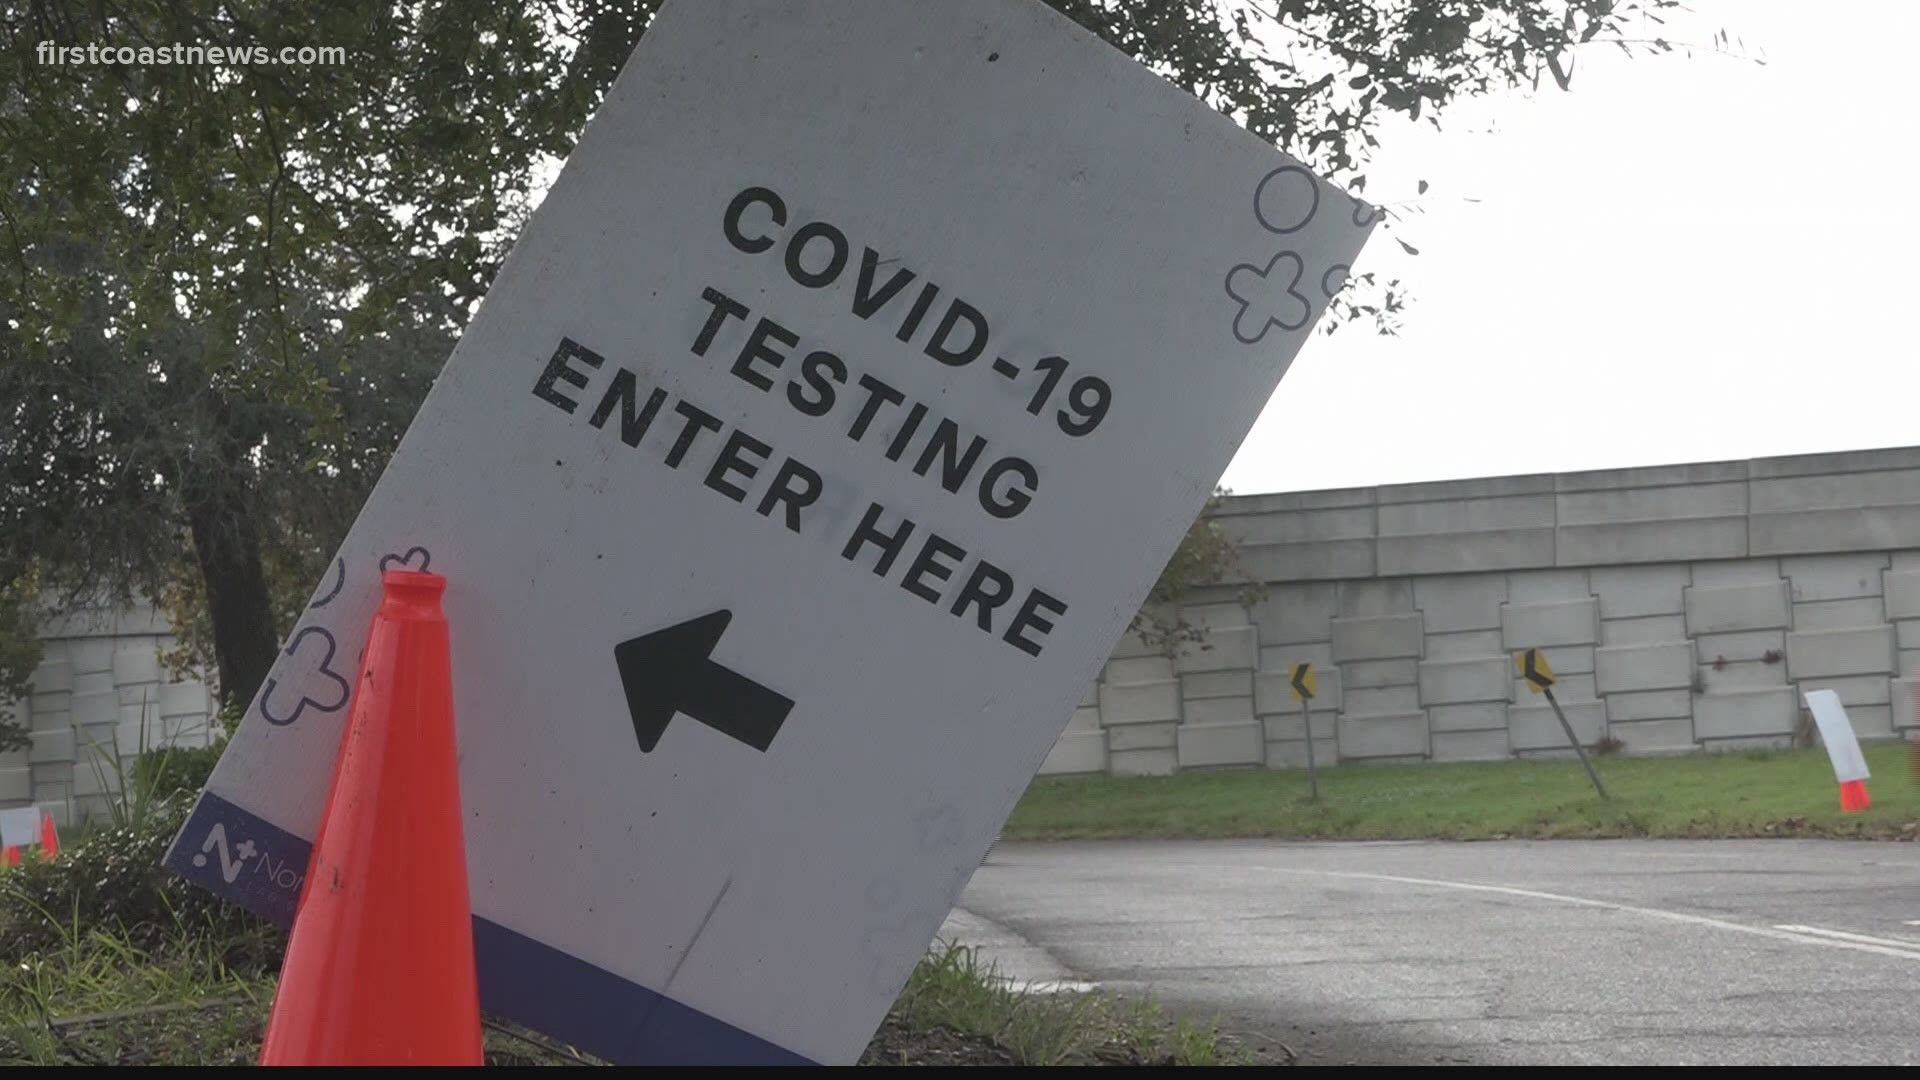 Long lines reported at COVID testing sites around the First Coast as cases surge